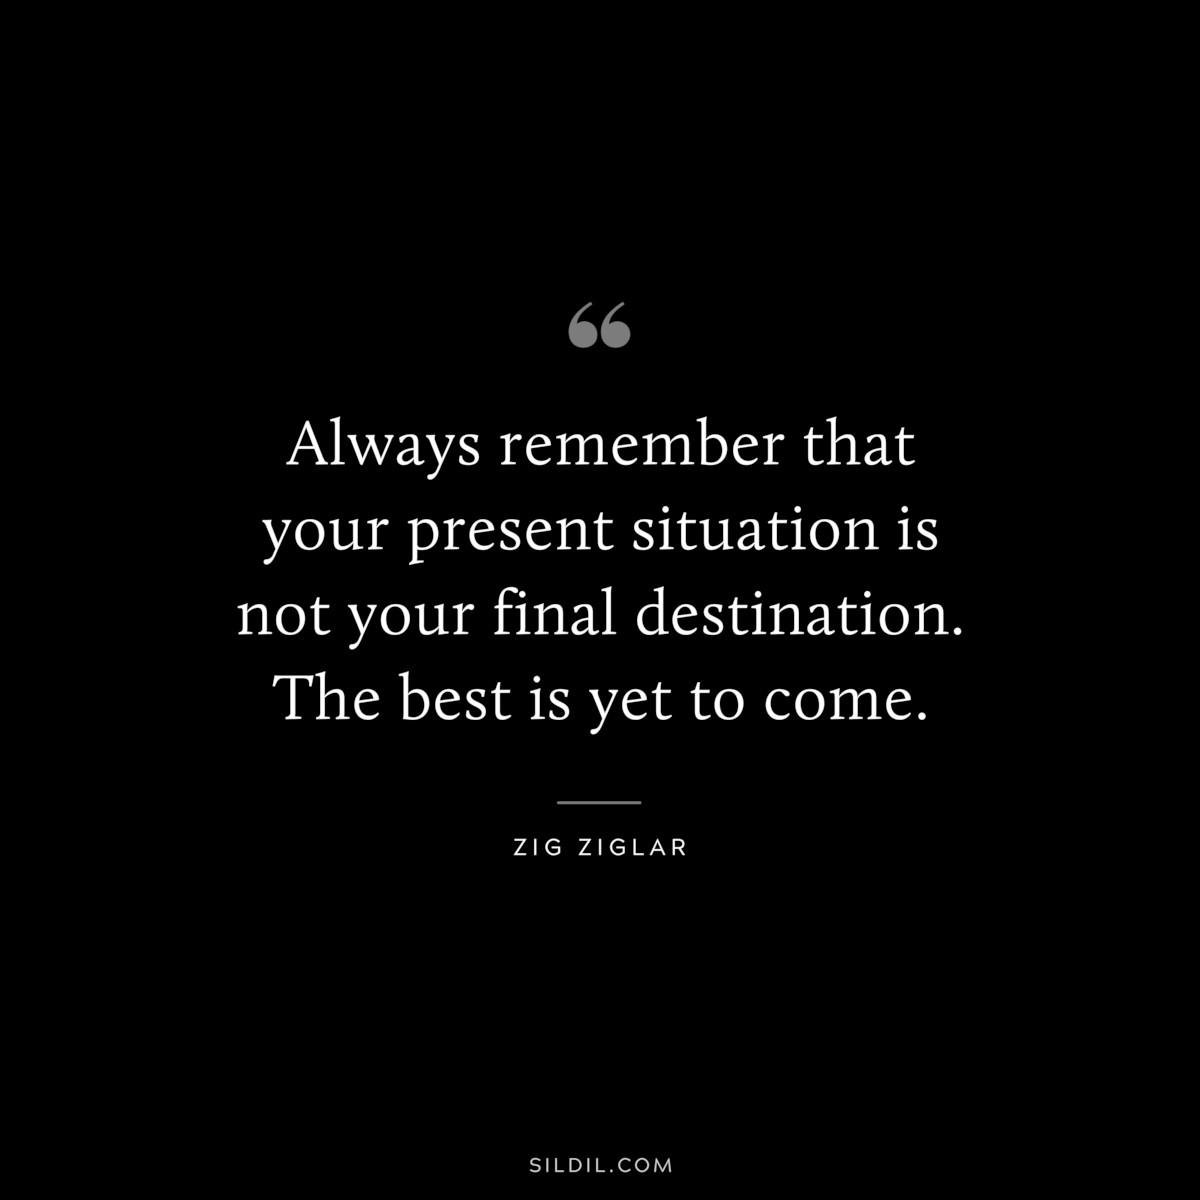 Always remember that your present situation is not your final destination. The best is yet to come. ― Zig Ziglar